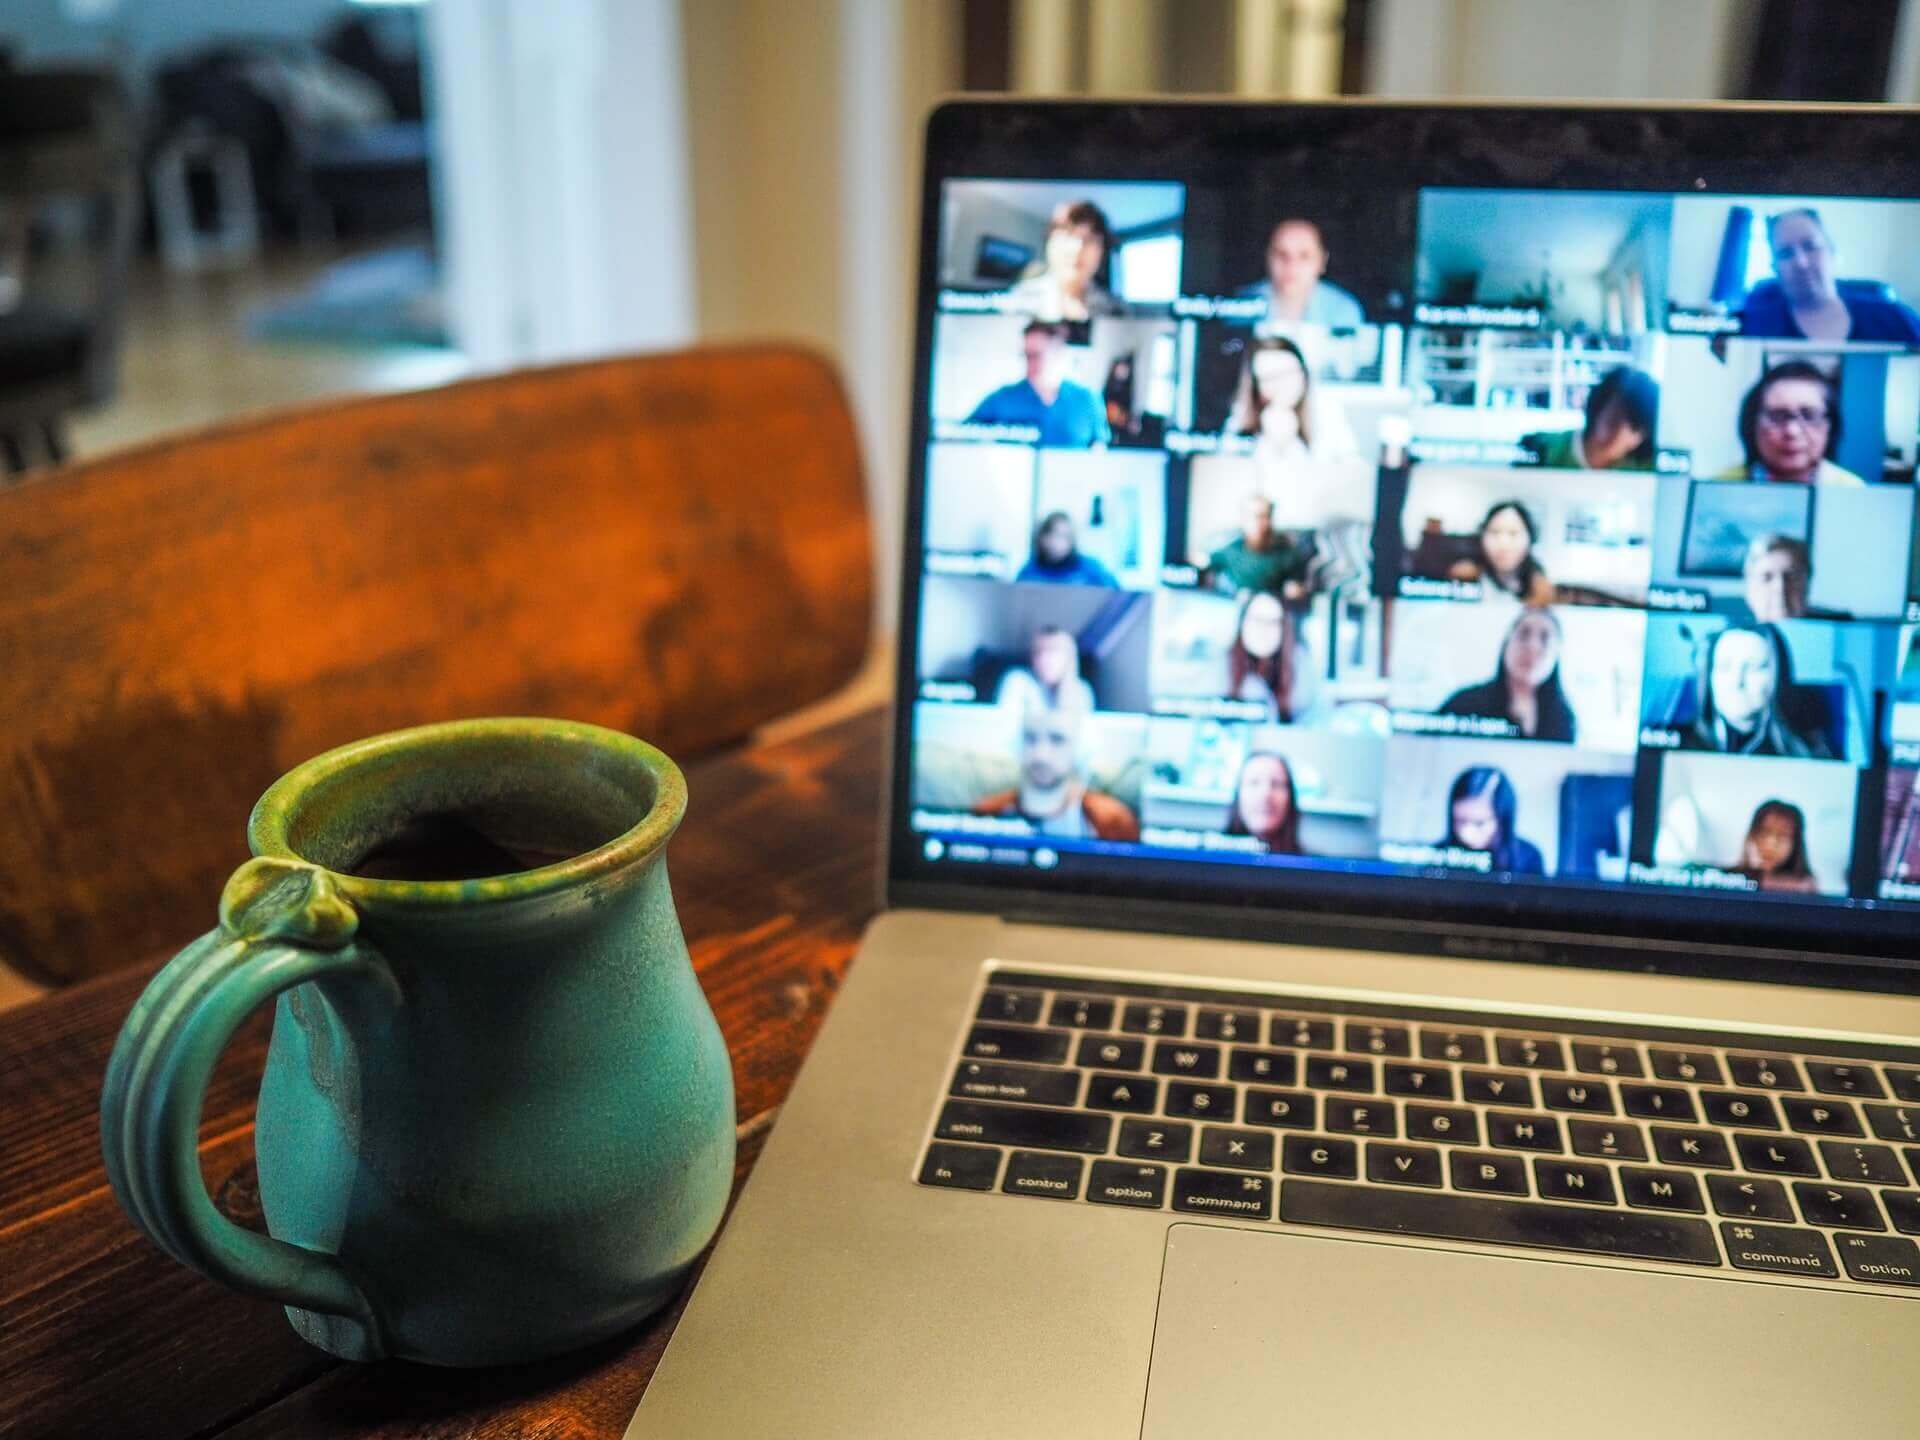 A laptop used for online meeting is placed beside a mug on the table